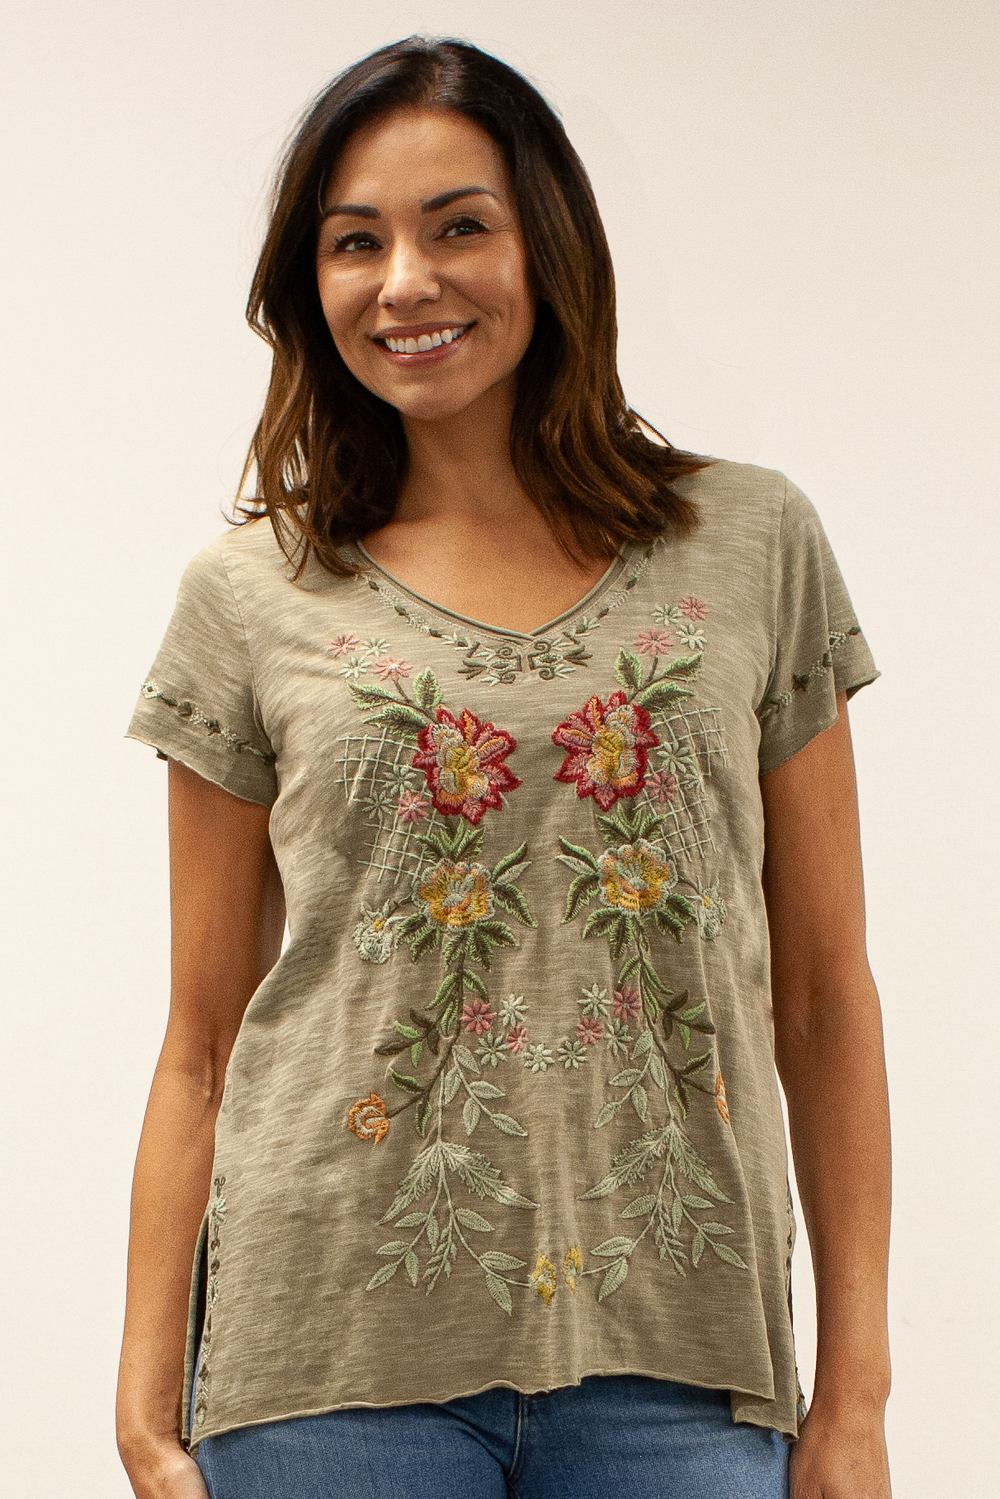 Caite Tilly t-shirt, embroidered short sleeve (2 colors)